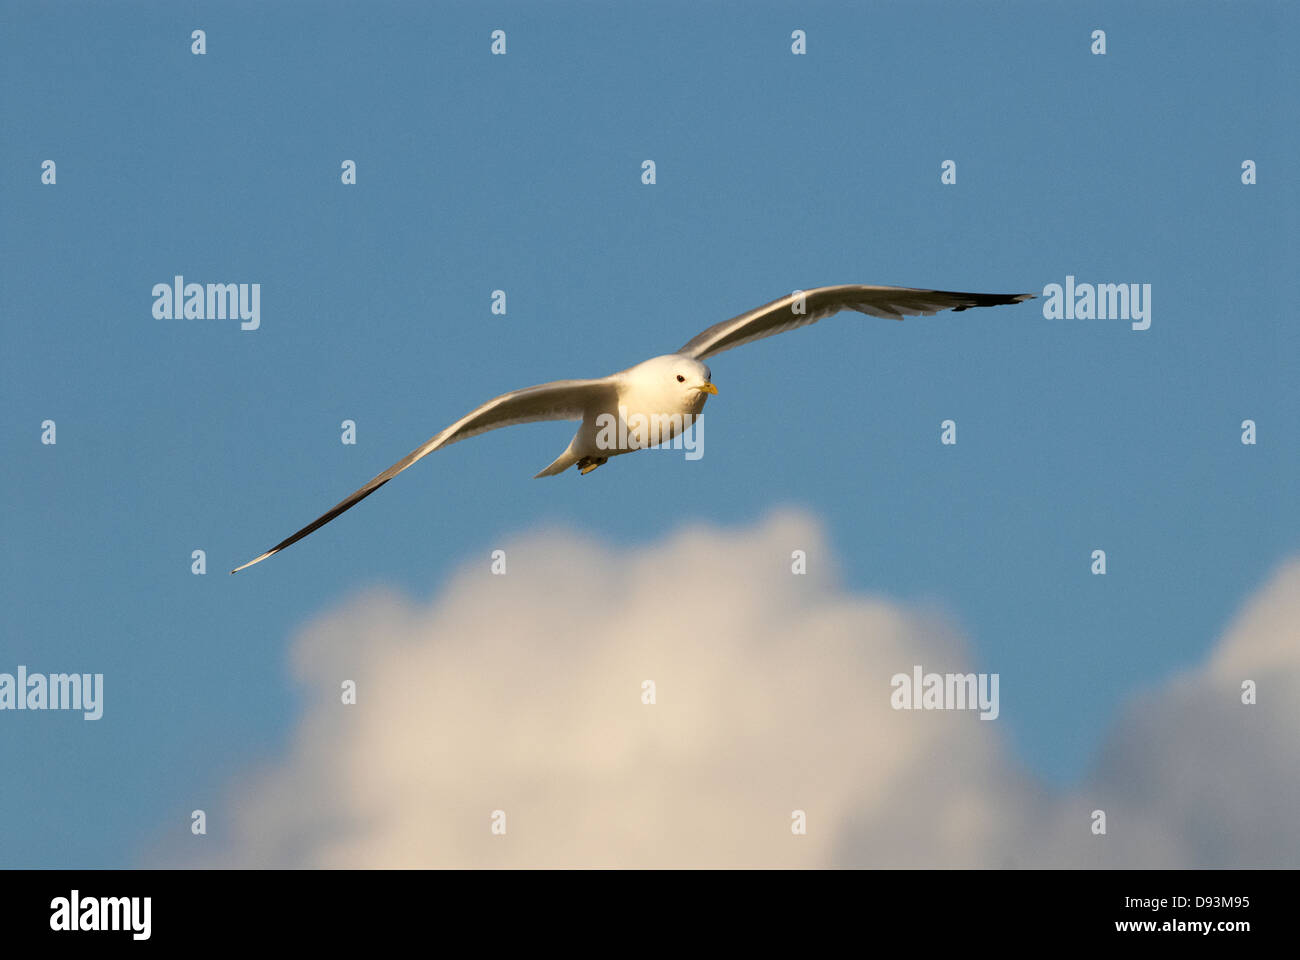 Common gull flying mid-air, low angle view Stock Photo